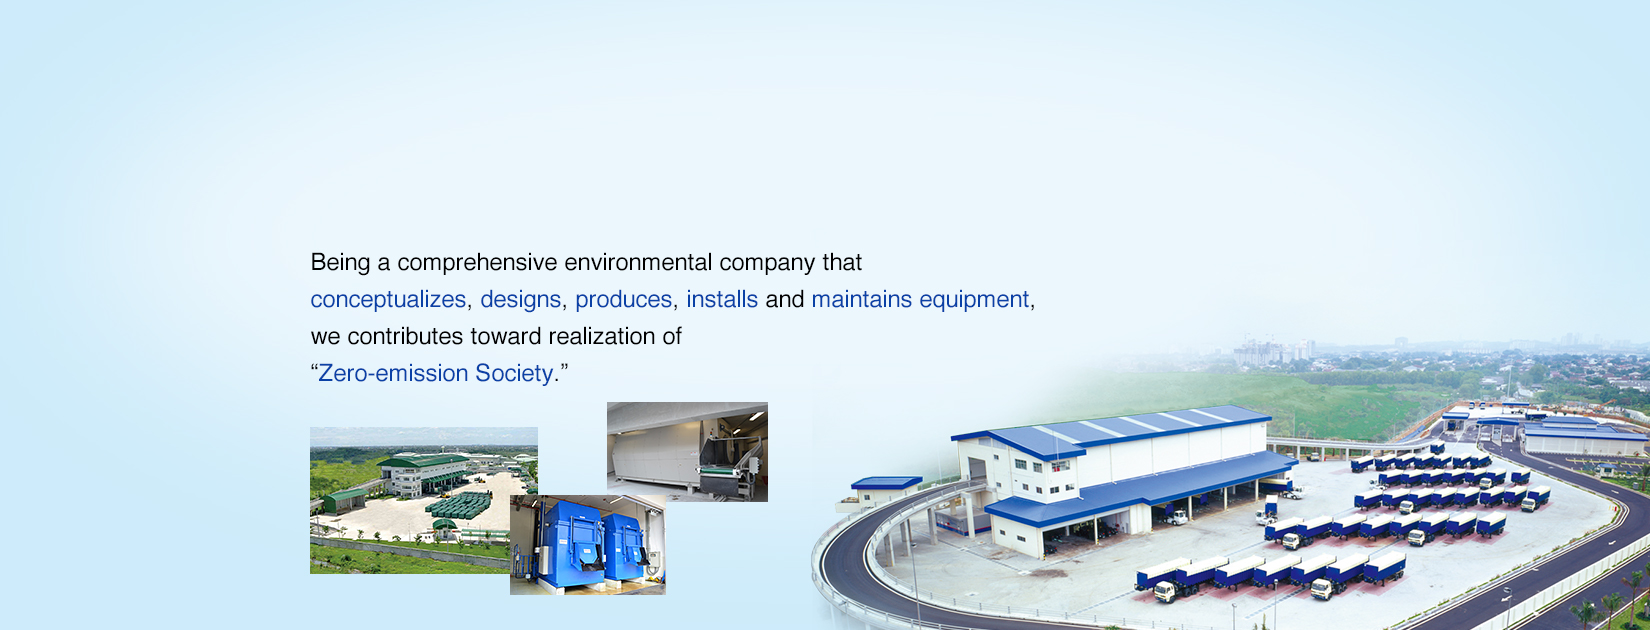 Being a comprehensive environmental company that conceptualizes, designs, produces, installs and maintains equipment, we contributes toward realization of “Zero-emission Society.”